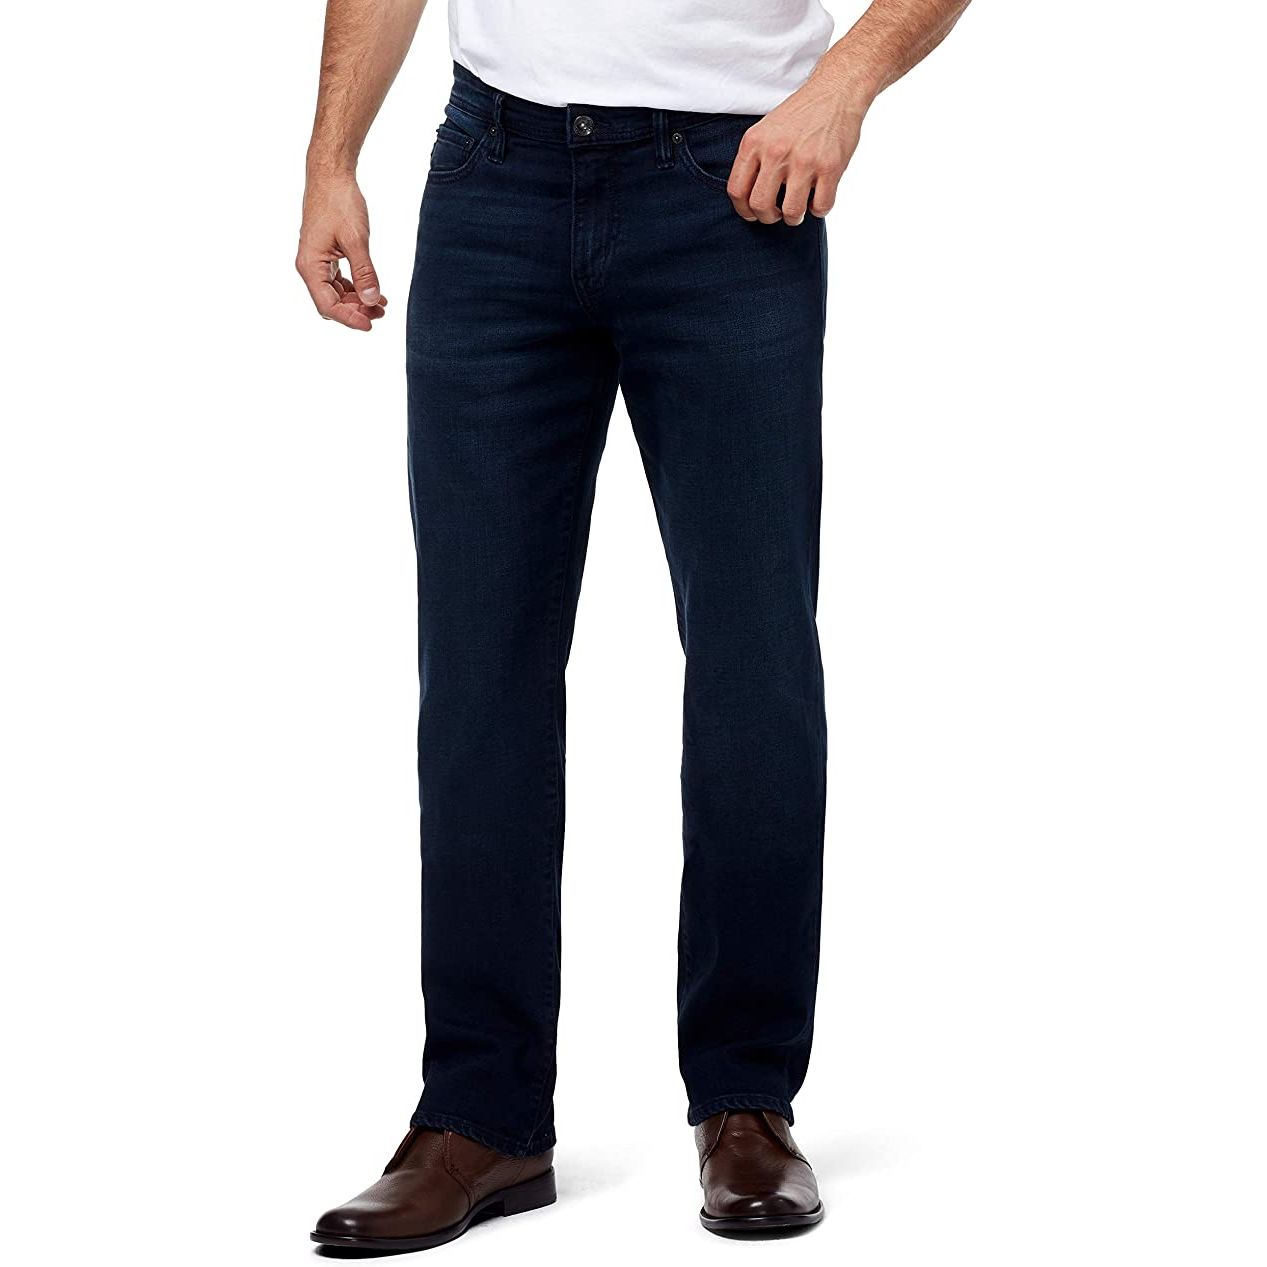 CHAPS Men's Relaxed Fit Straight Leg Jean - Classic Denim for Comfortable and Stylish Looks